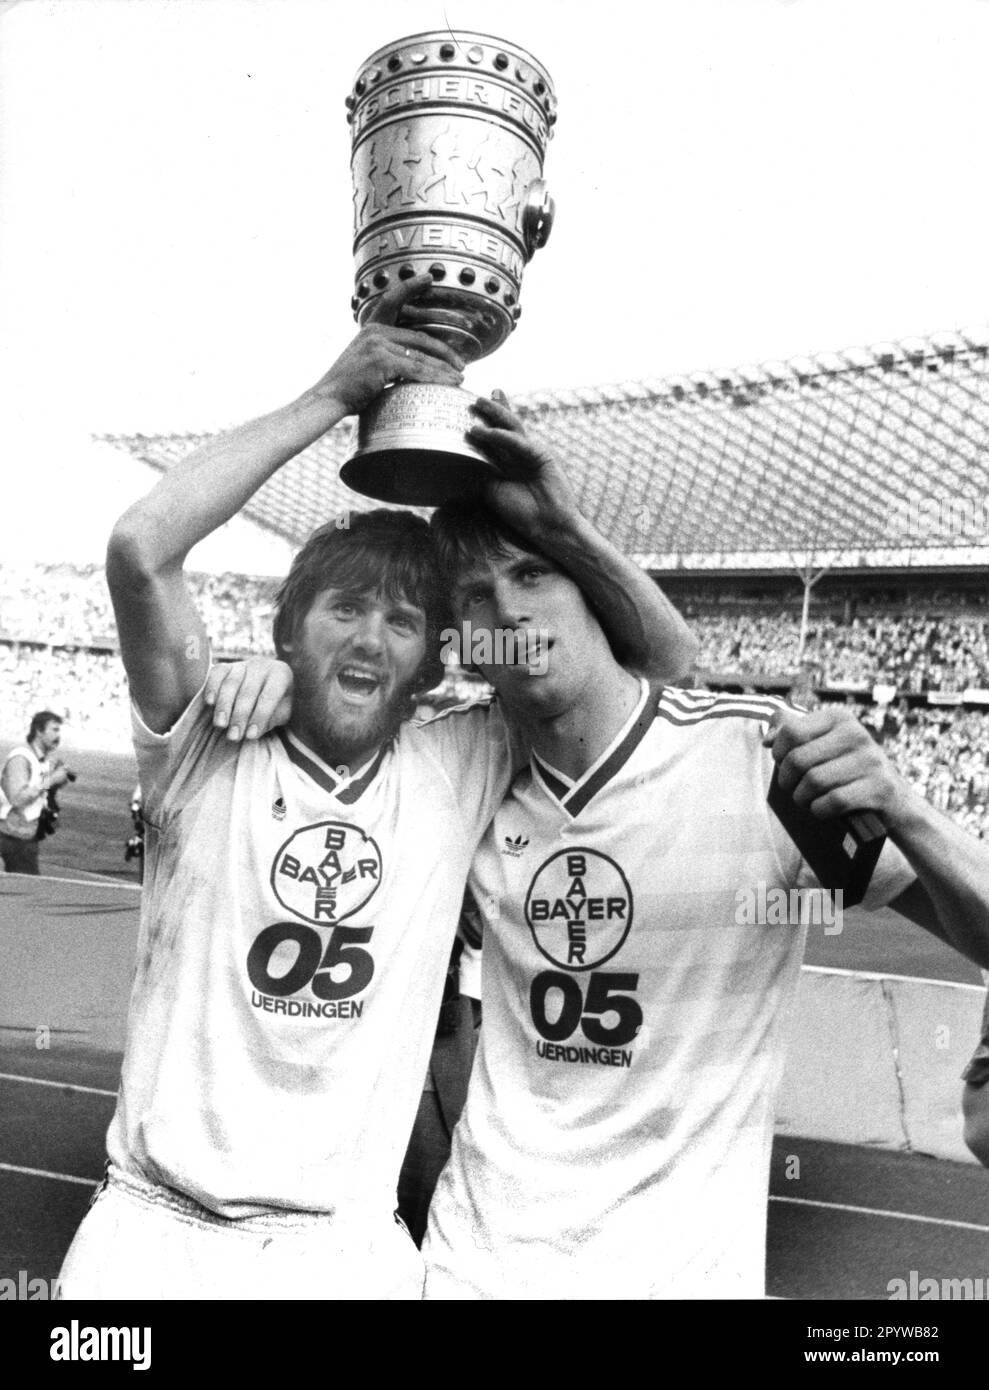 DFB Cup Final FC Bayern Munich - Bayer 05 Uerdingen 26.05.1985. Friedhelm (left) and Wolfgang Funkel (Bayer Uerdingen) present the cup. For journalistic use only! Only for editorial use! [automated translation] Stock Photo